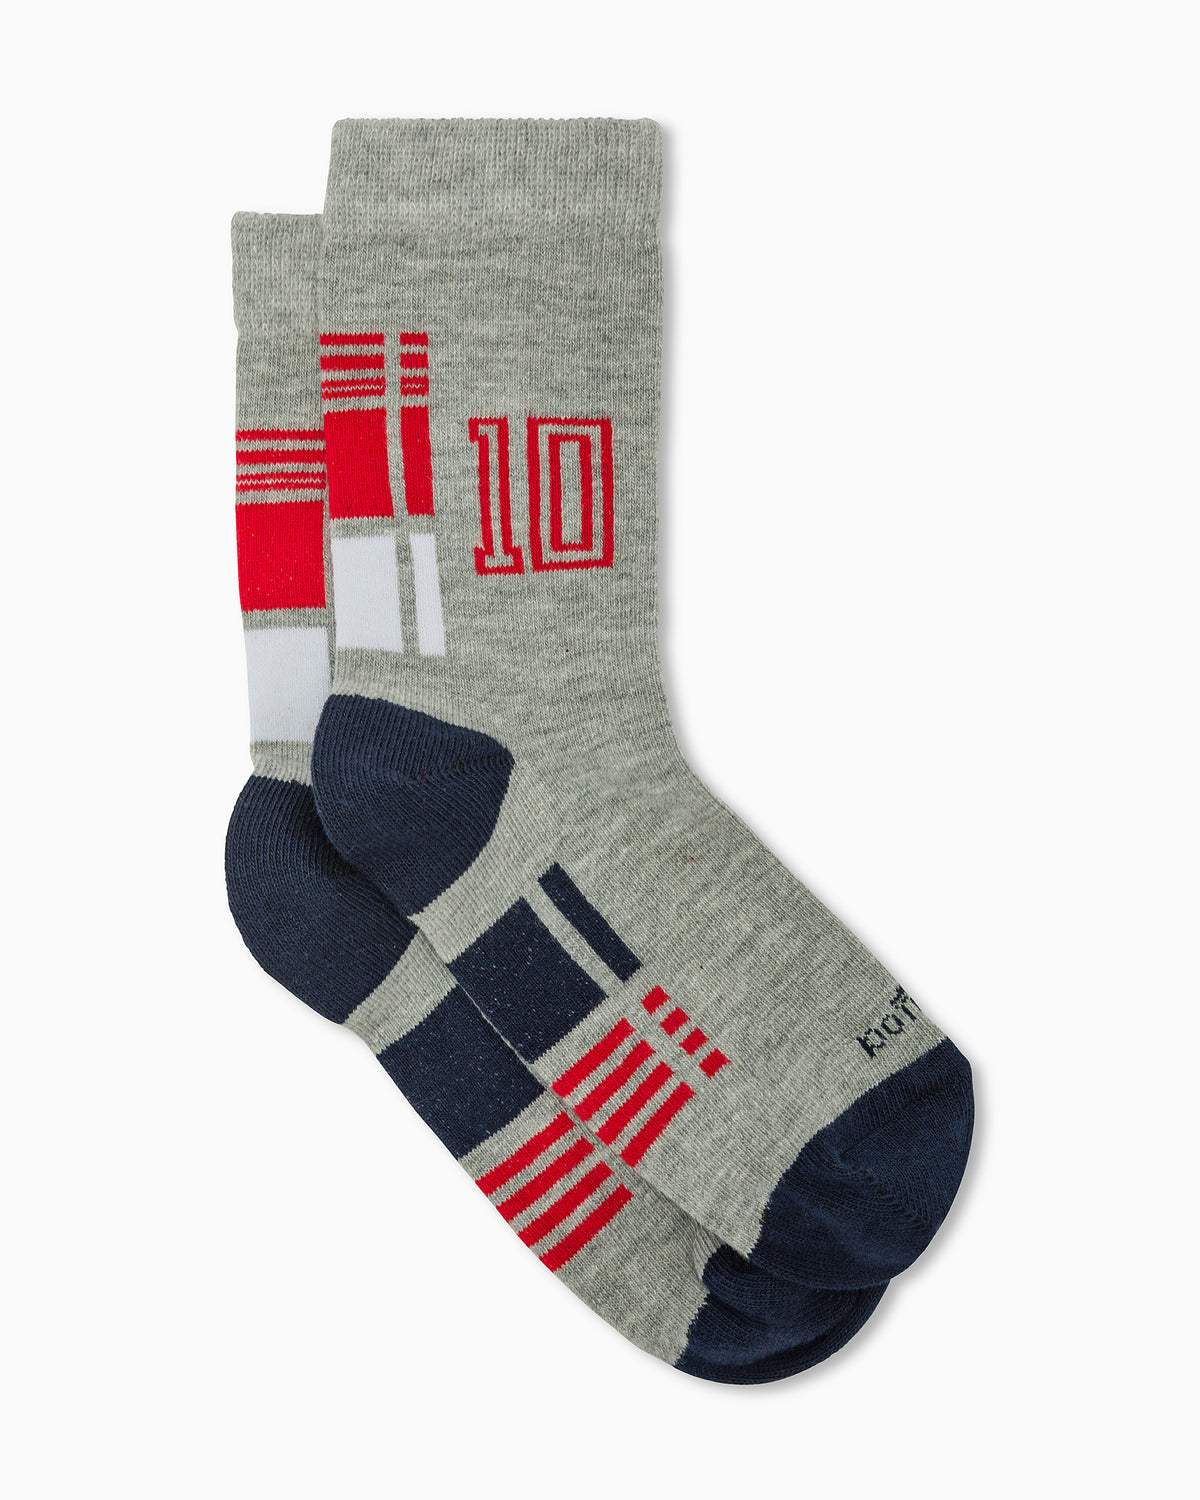 Gabriele boys’ sock with placed design